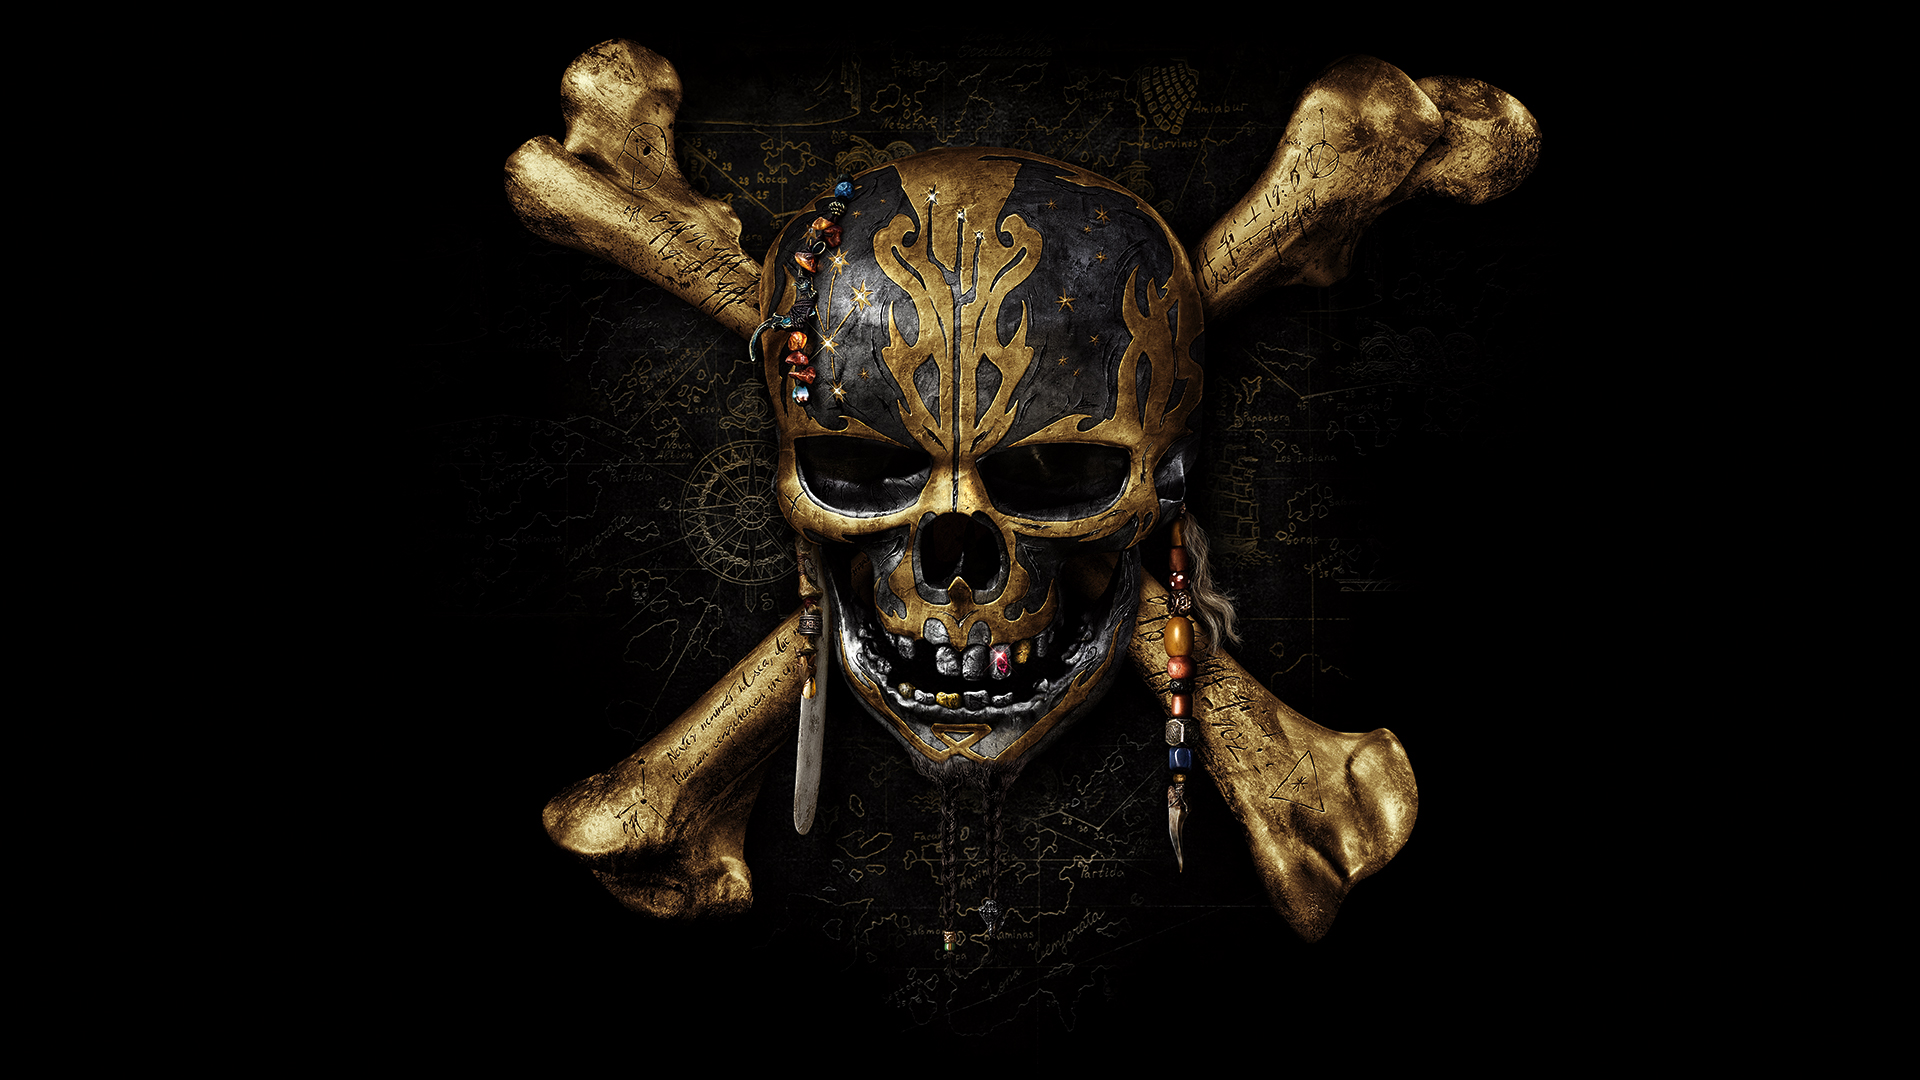 Pirates of the Caribbean: Dead Men Tell No Tales, Movies, Pirates of the Caribbean Wallpaper